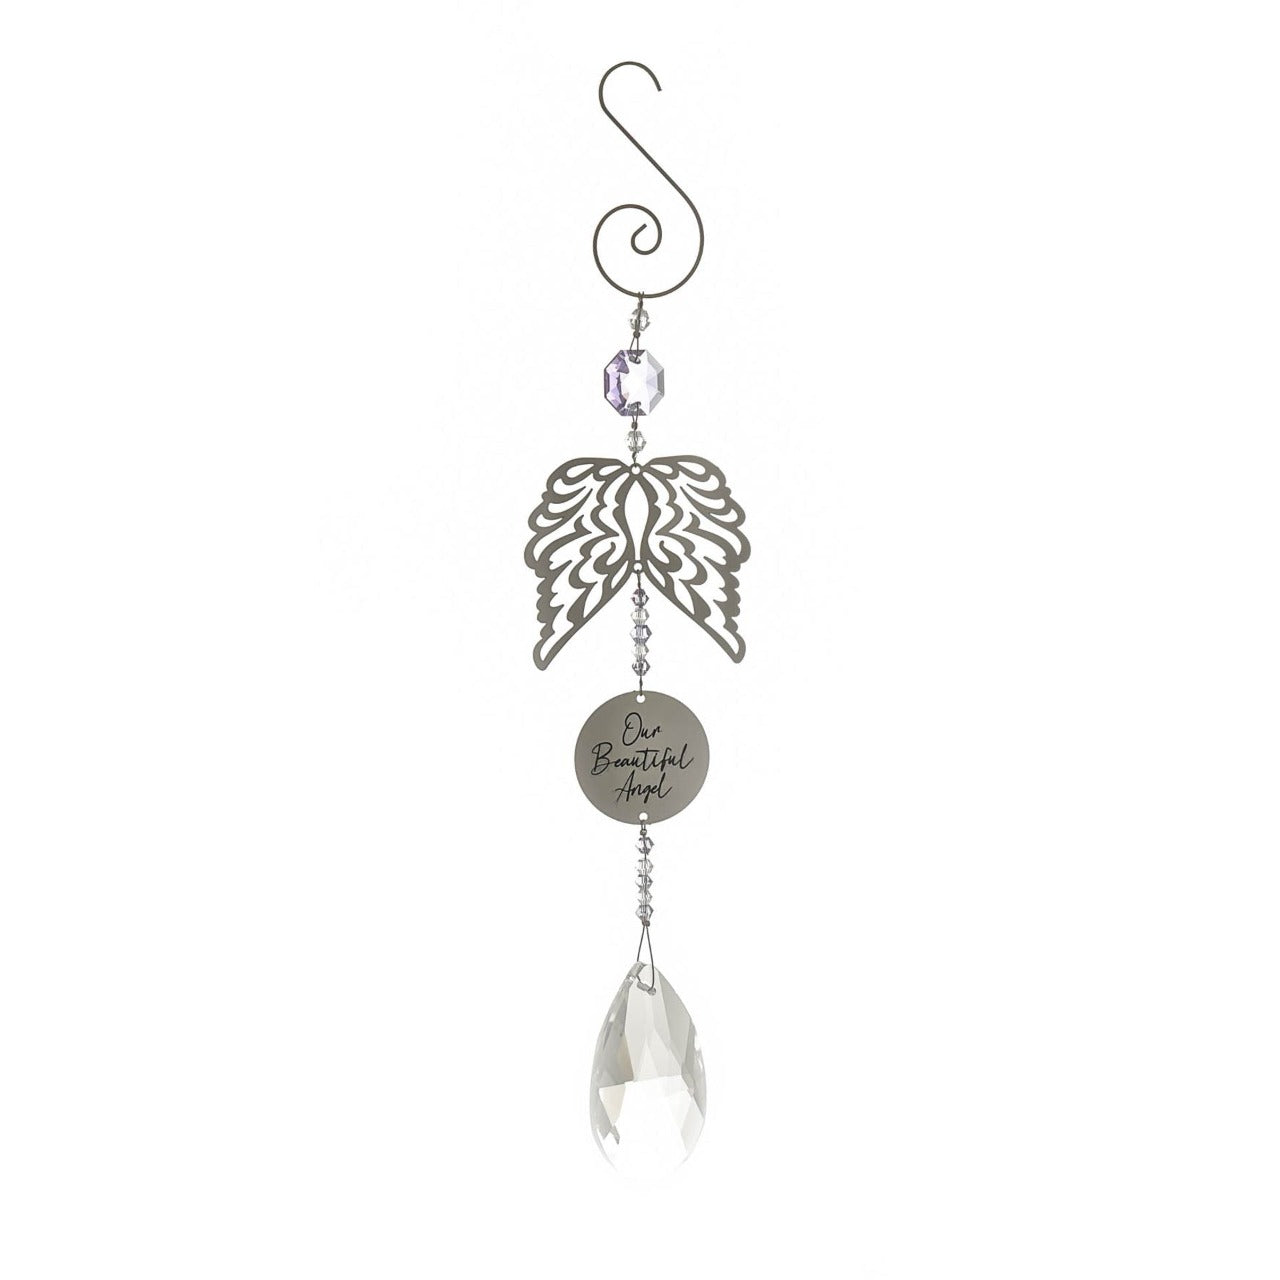 Thoughts of You Crystal Metal Hanger - Wings  A crystal metal hanger from Thoughts of You by CELEBRATIONS®.  This sparkling decoration is a thoughtful memorial gift which glistens in the sun to commemorate loved ones who have passed.